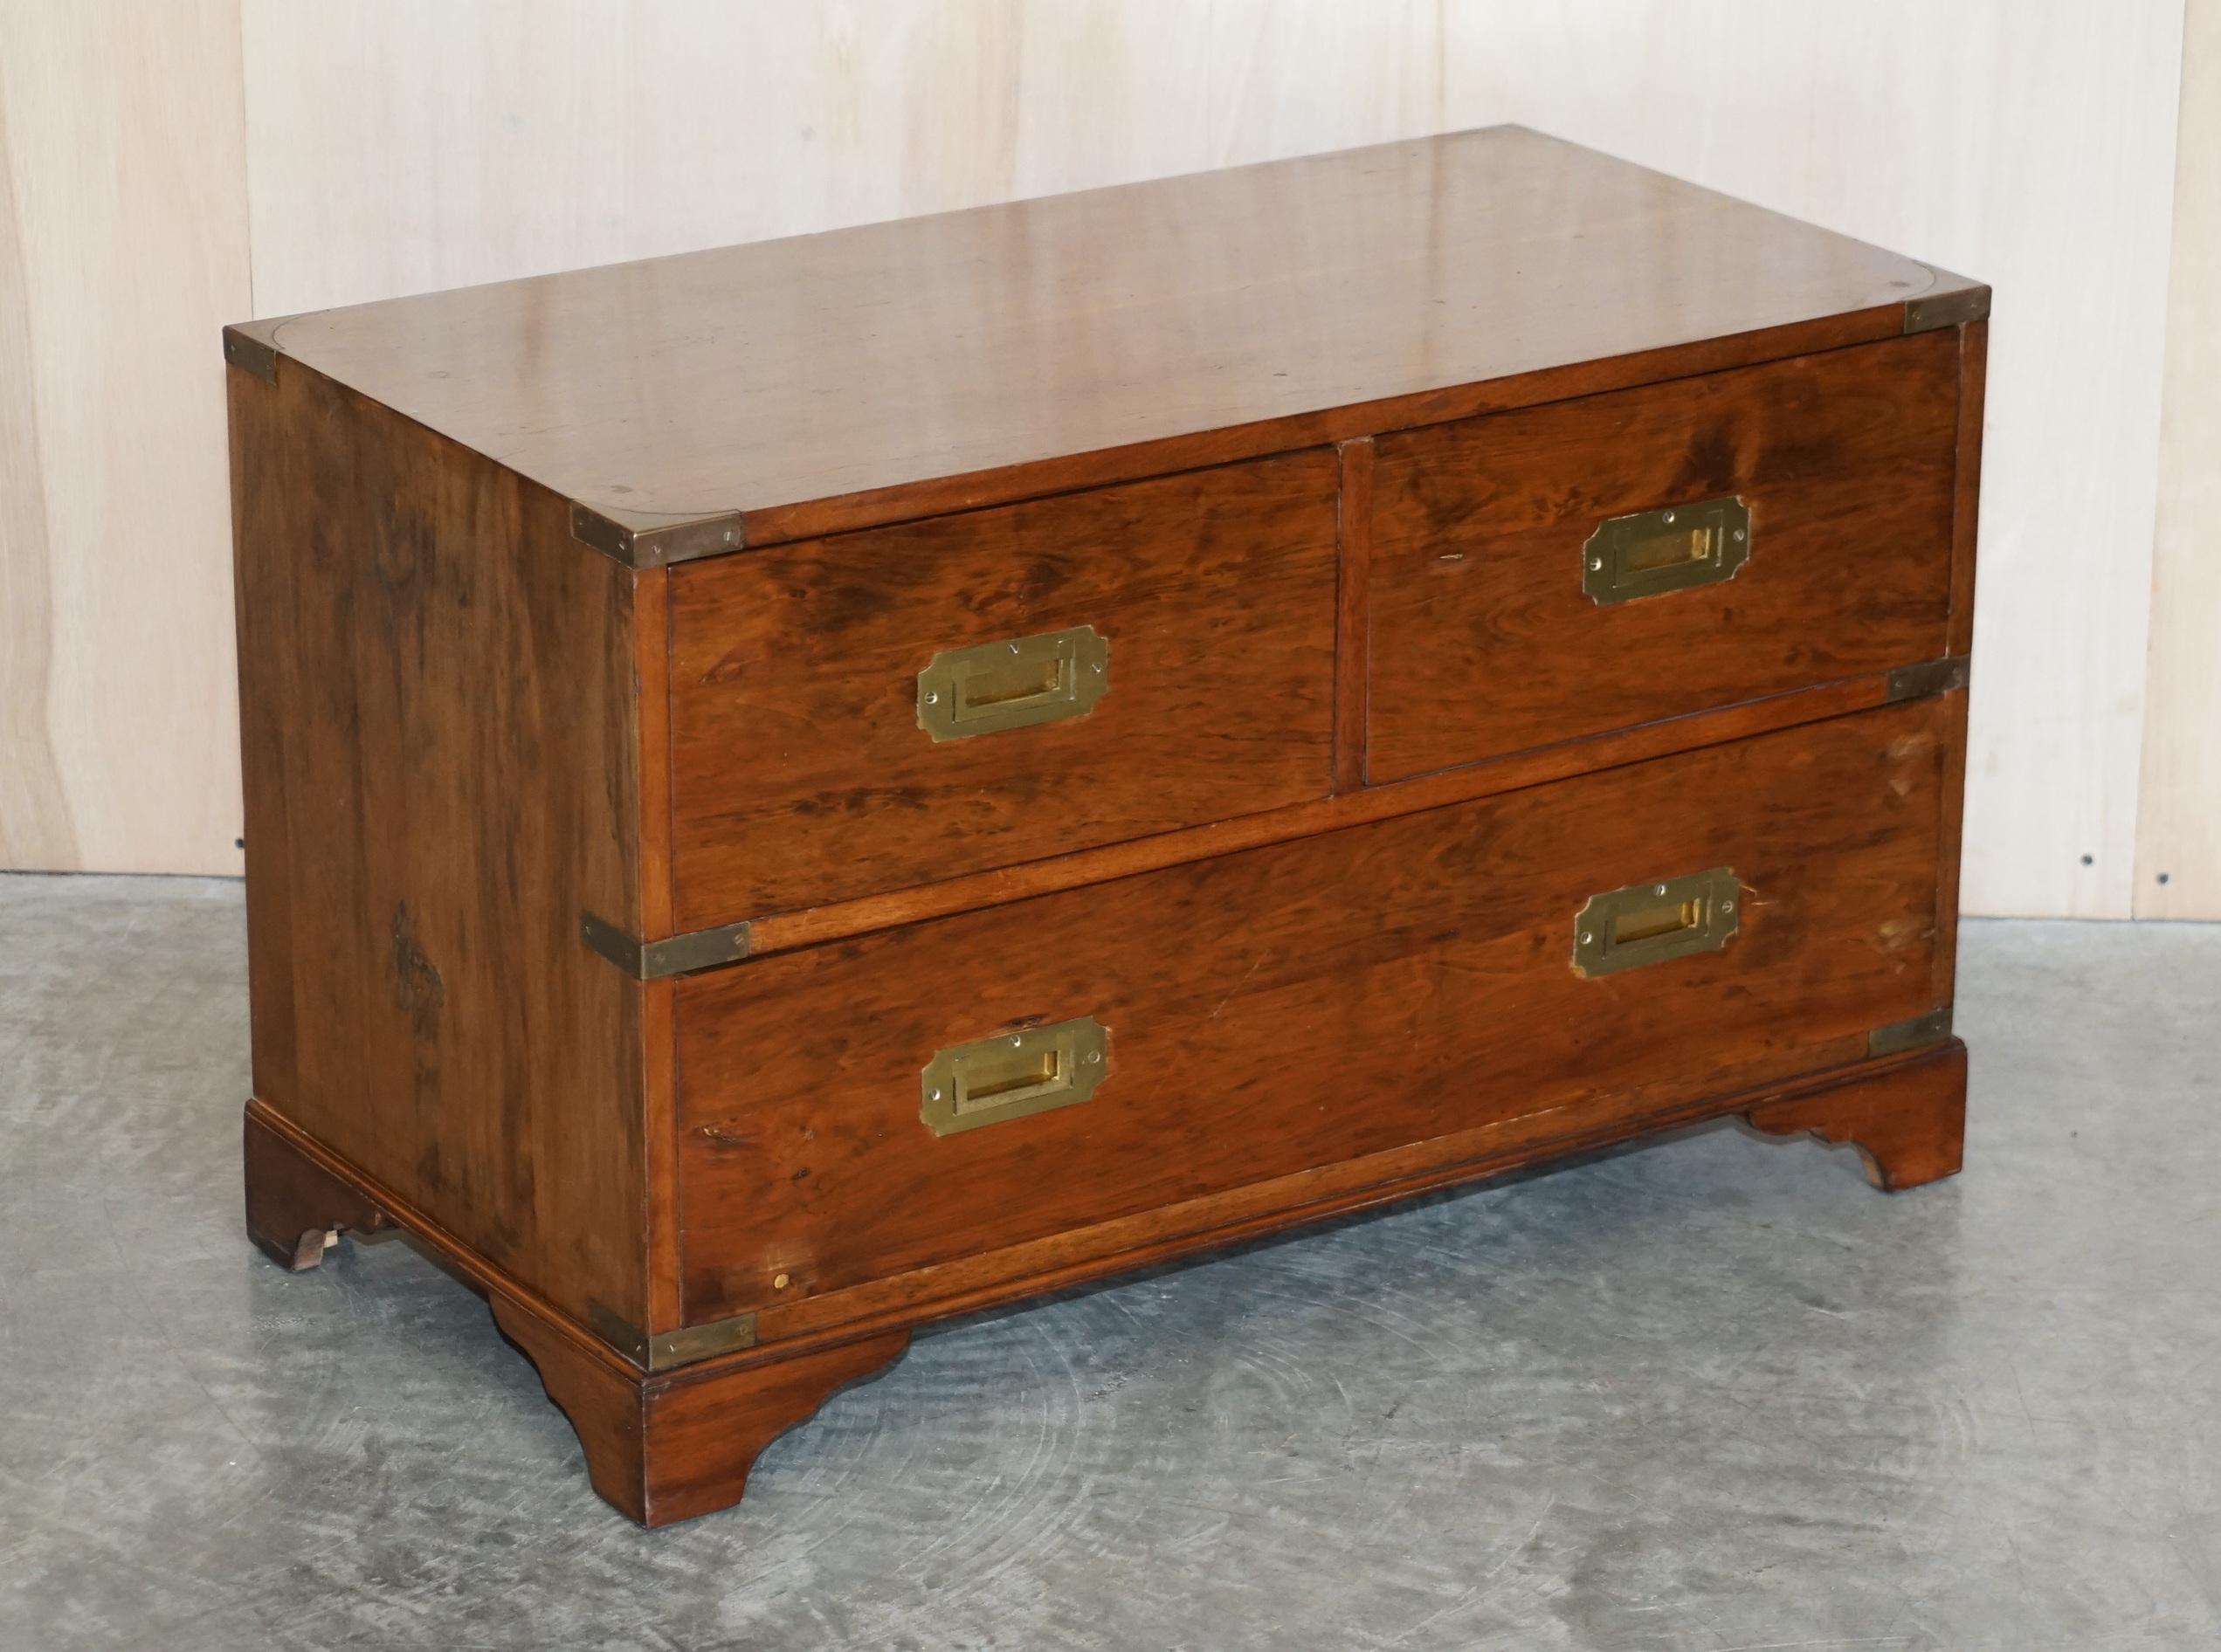 We are delighted to offer for sale this lovely vintage Burr Yew wood two over one, chest of drawer to be used for a TV or media stand

A very good looking and utilitarian piece, it’s a nicely sized, ideally suited as mentioned for a TV but it can